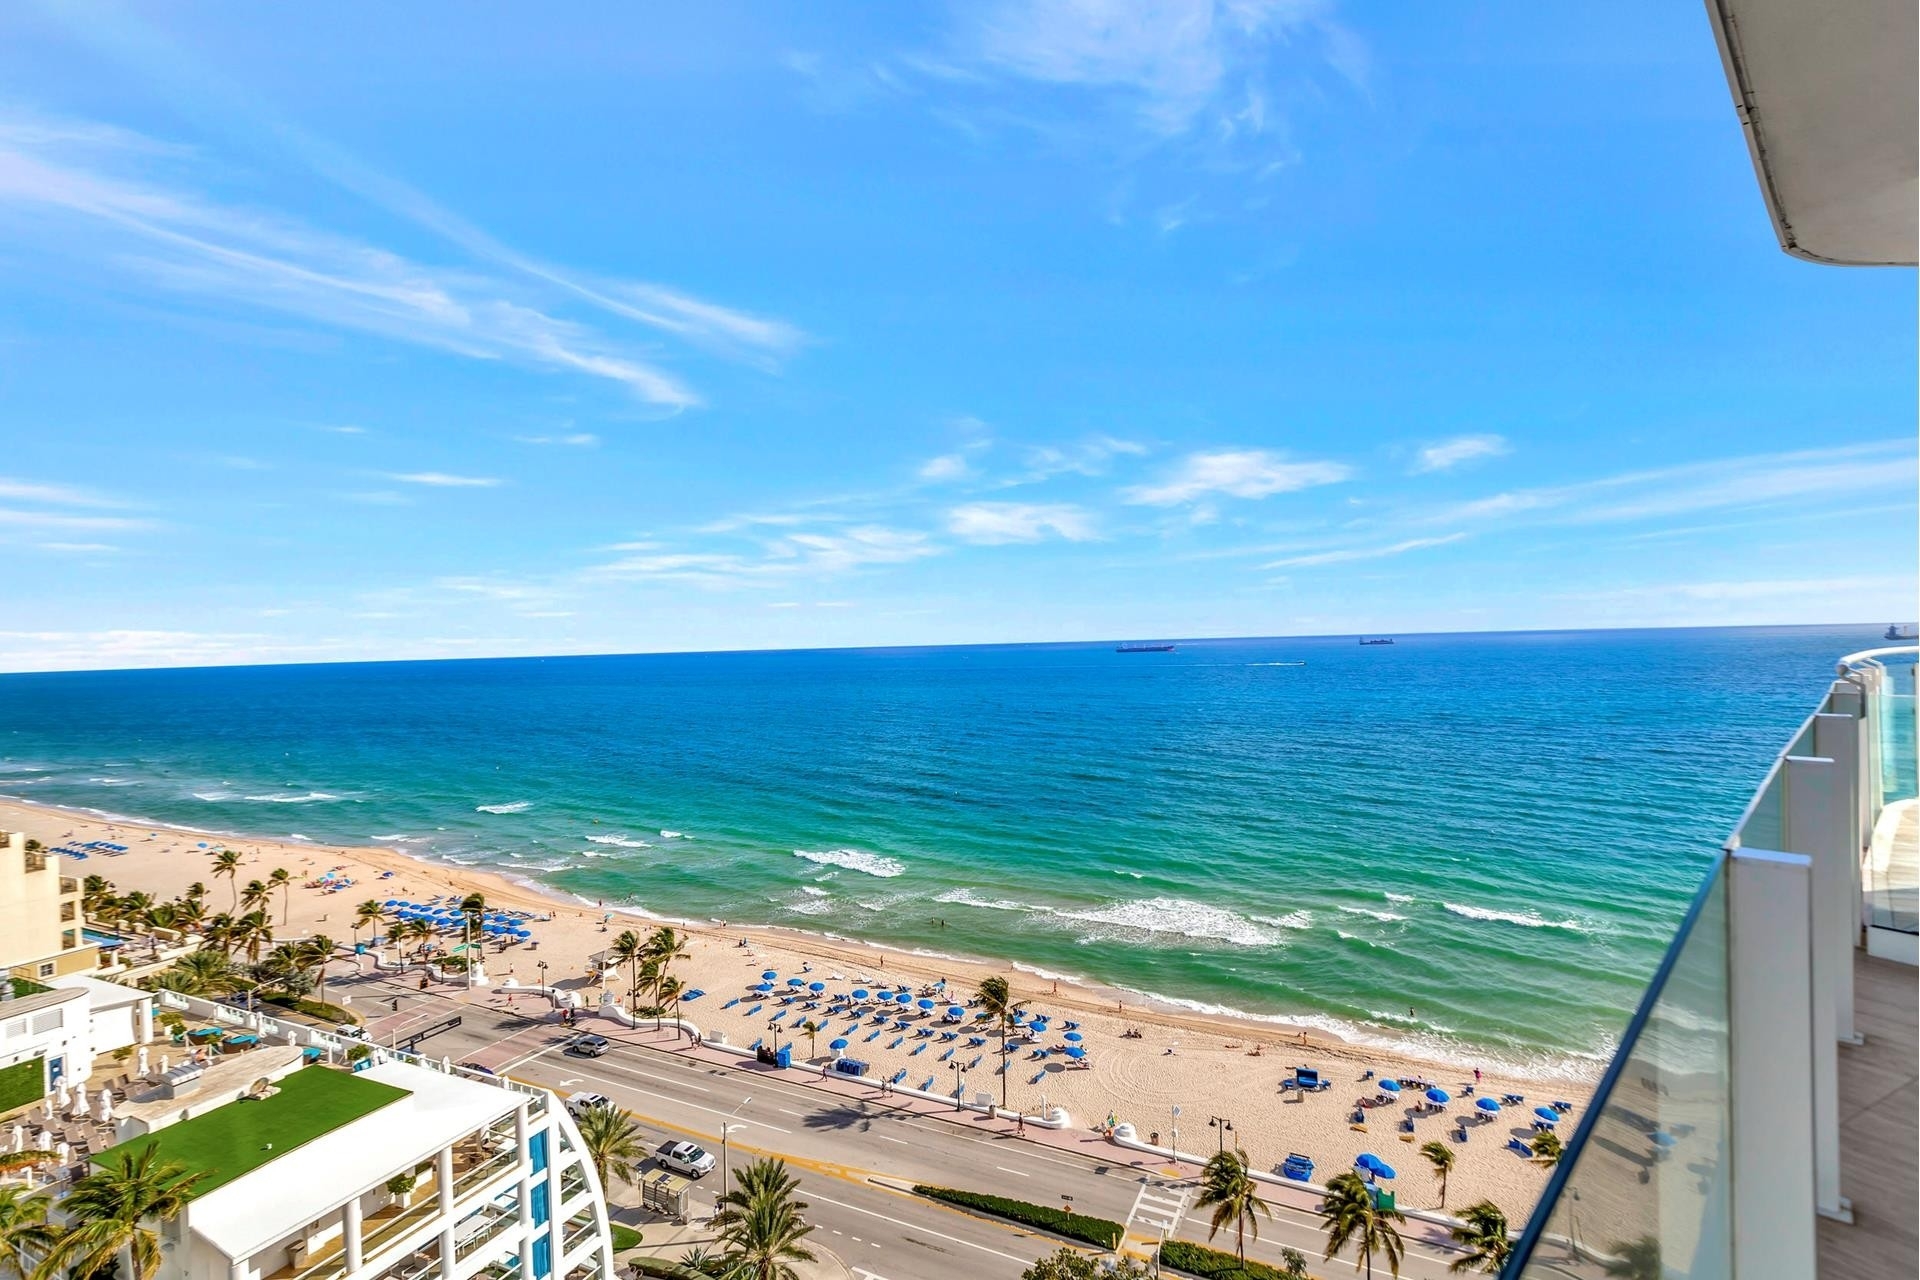 1. Condominiums for Sale at 525 N Ft Lauderdale Bch Blvd, 1402 Central Beach, Fort Lauderdale, FL 33304